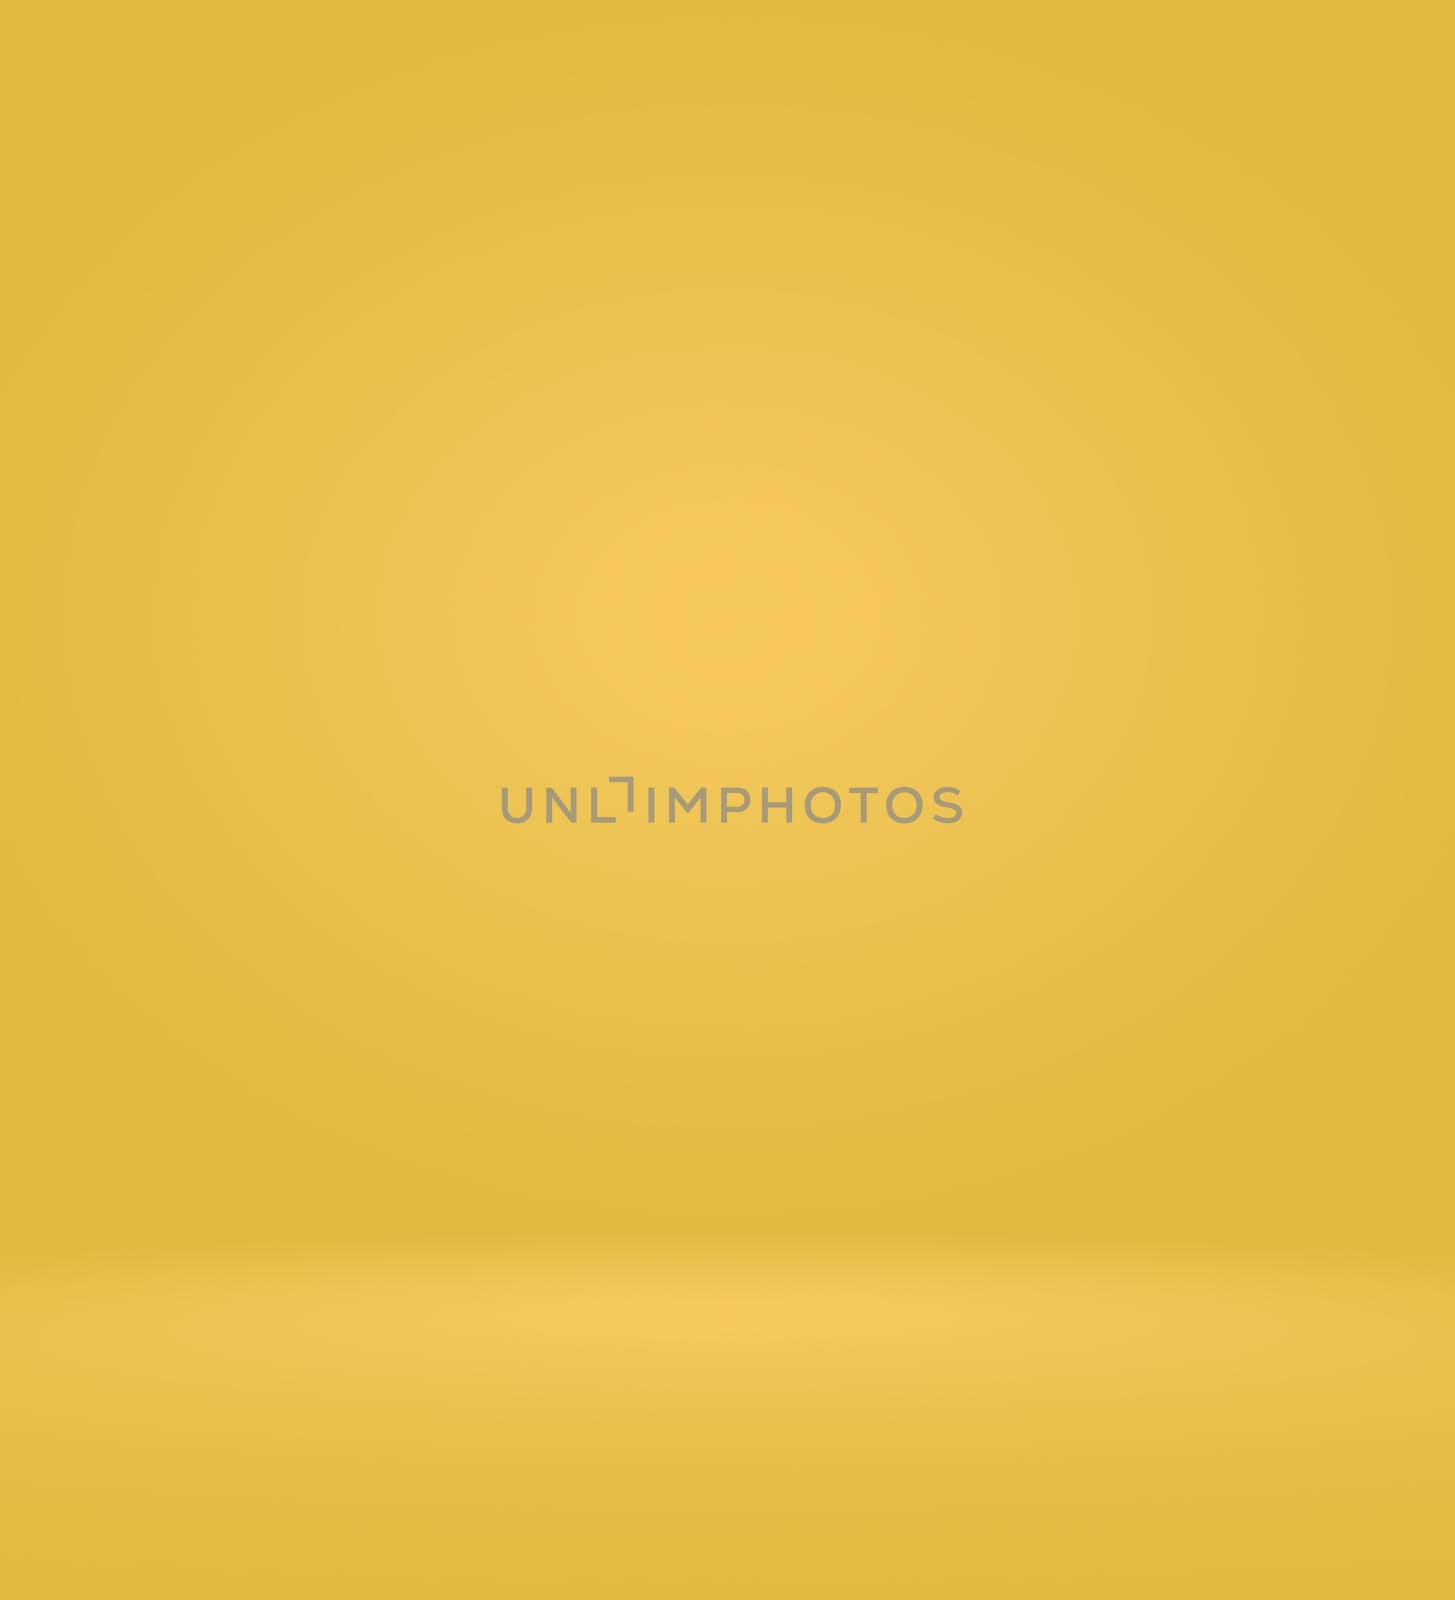 Gold shiny smooth background with variating hues